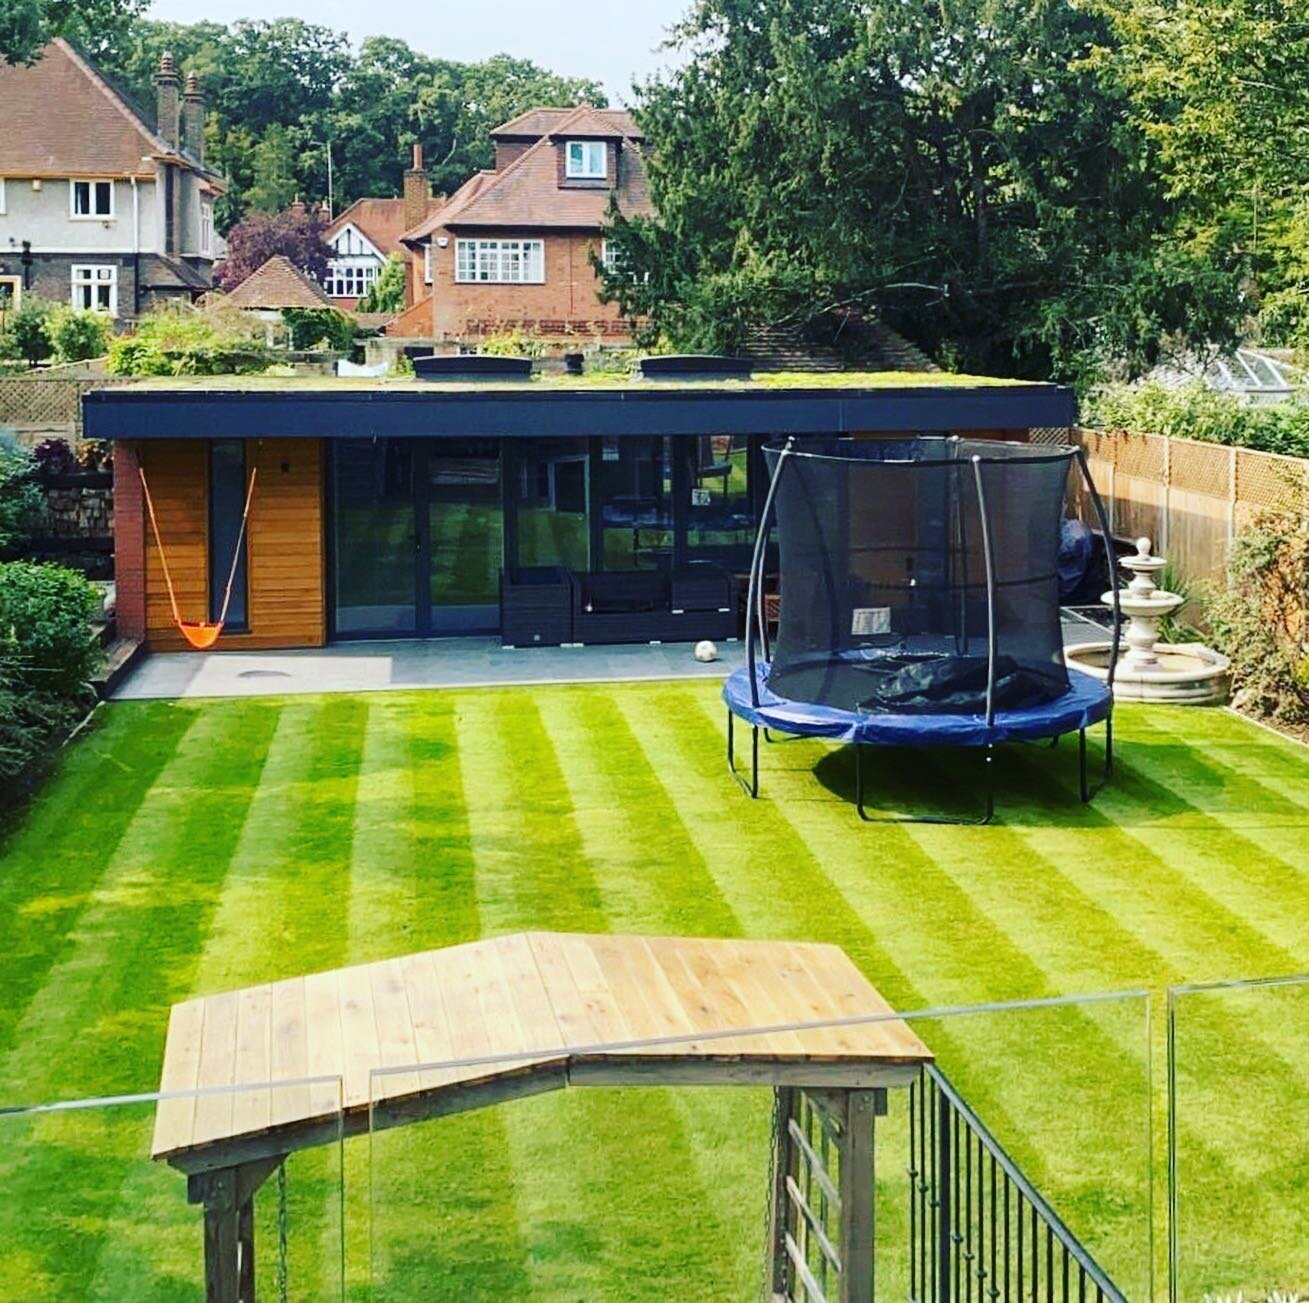 Lawn we laid looking fresh after our fortnightly maintenance visit 👌
-
-
-
-
-

#wow #garden #summer #londongarden #plants #trees #landscaping #gardening #gardenservices #colourful #vibrant #happy #nature #haven #stunning #greenspace #lawn #beautifu